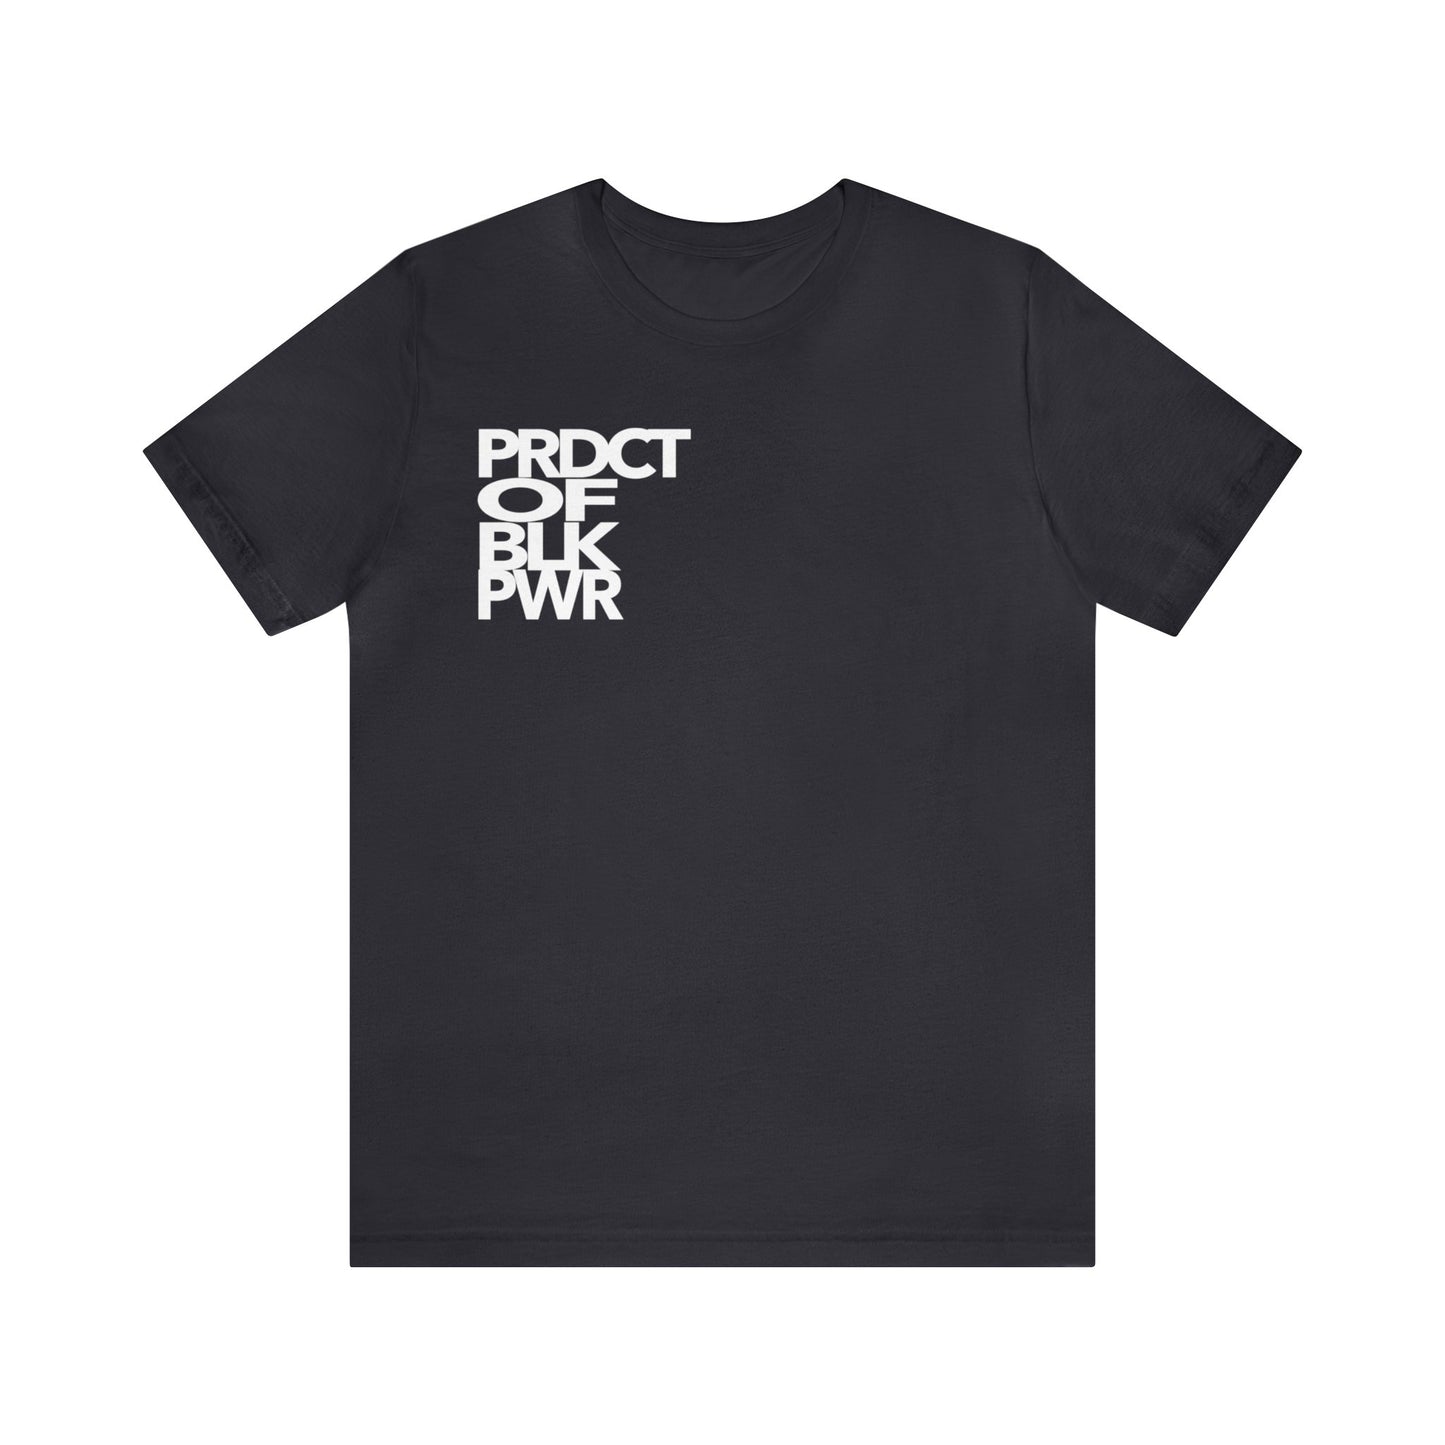 "Product of Black Power" Tee